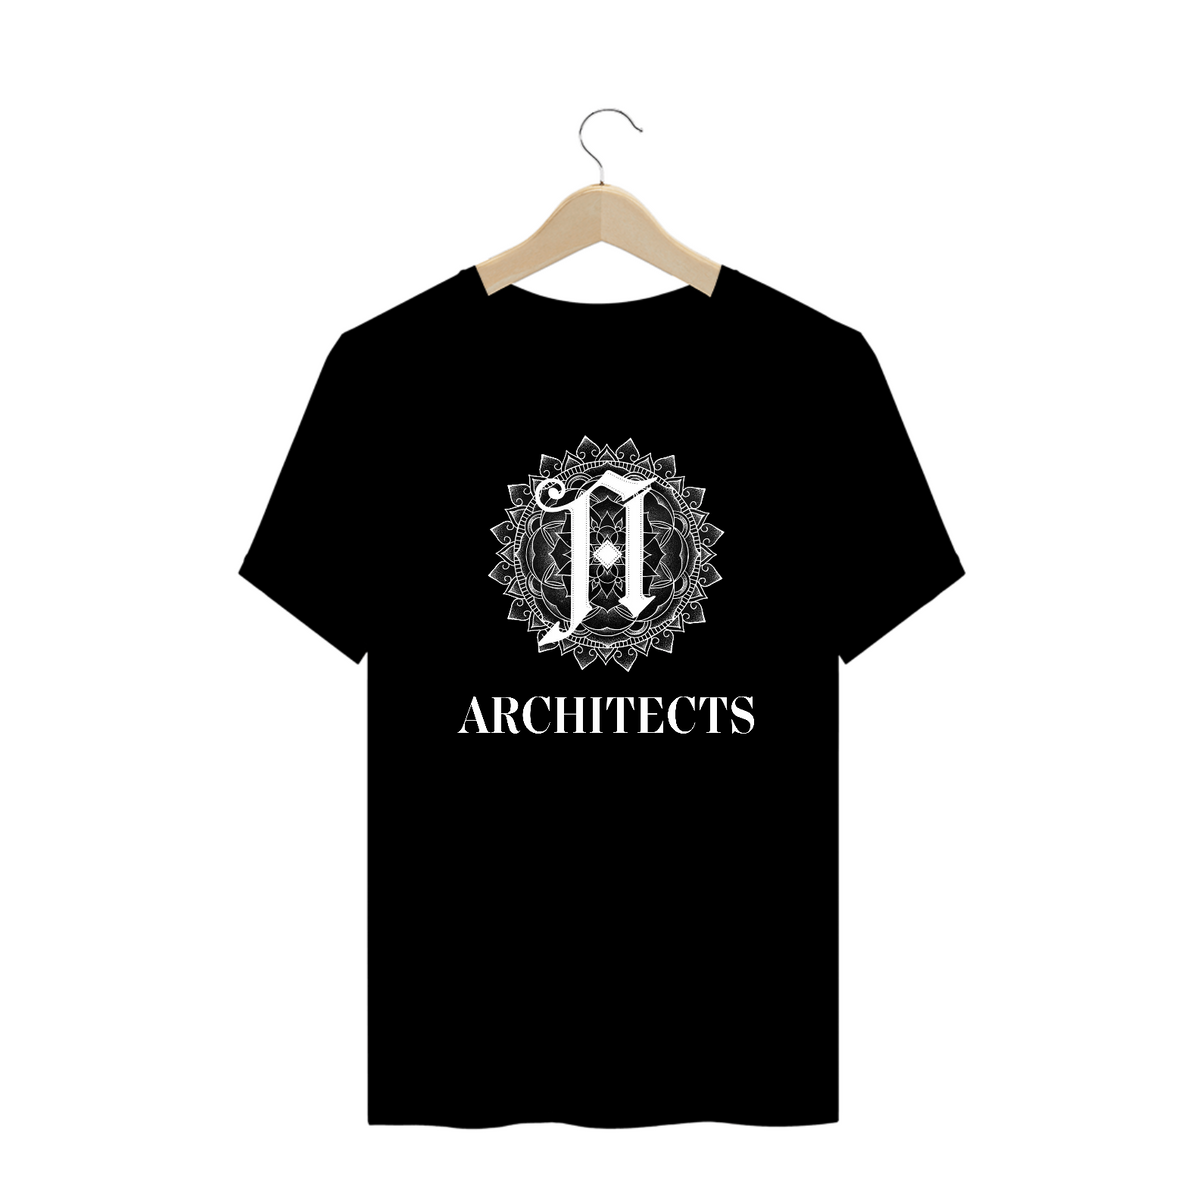 Nome do produto: Architects - Lost Forever - Plus Size